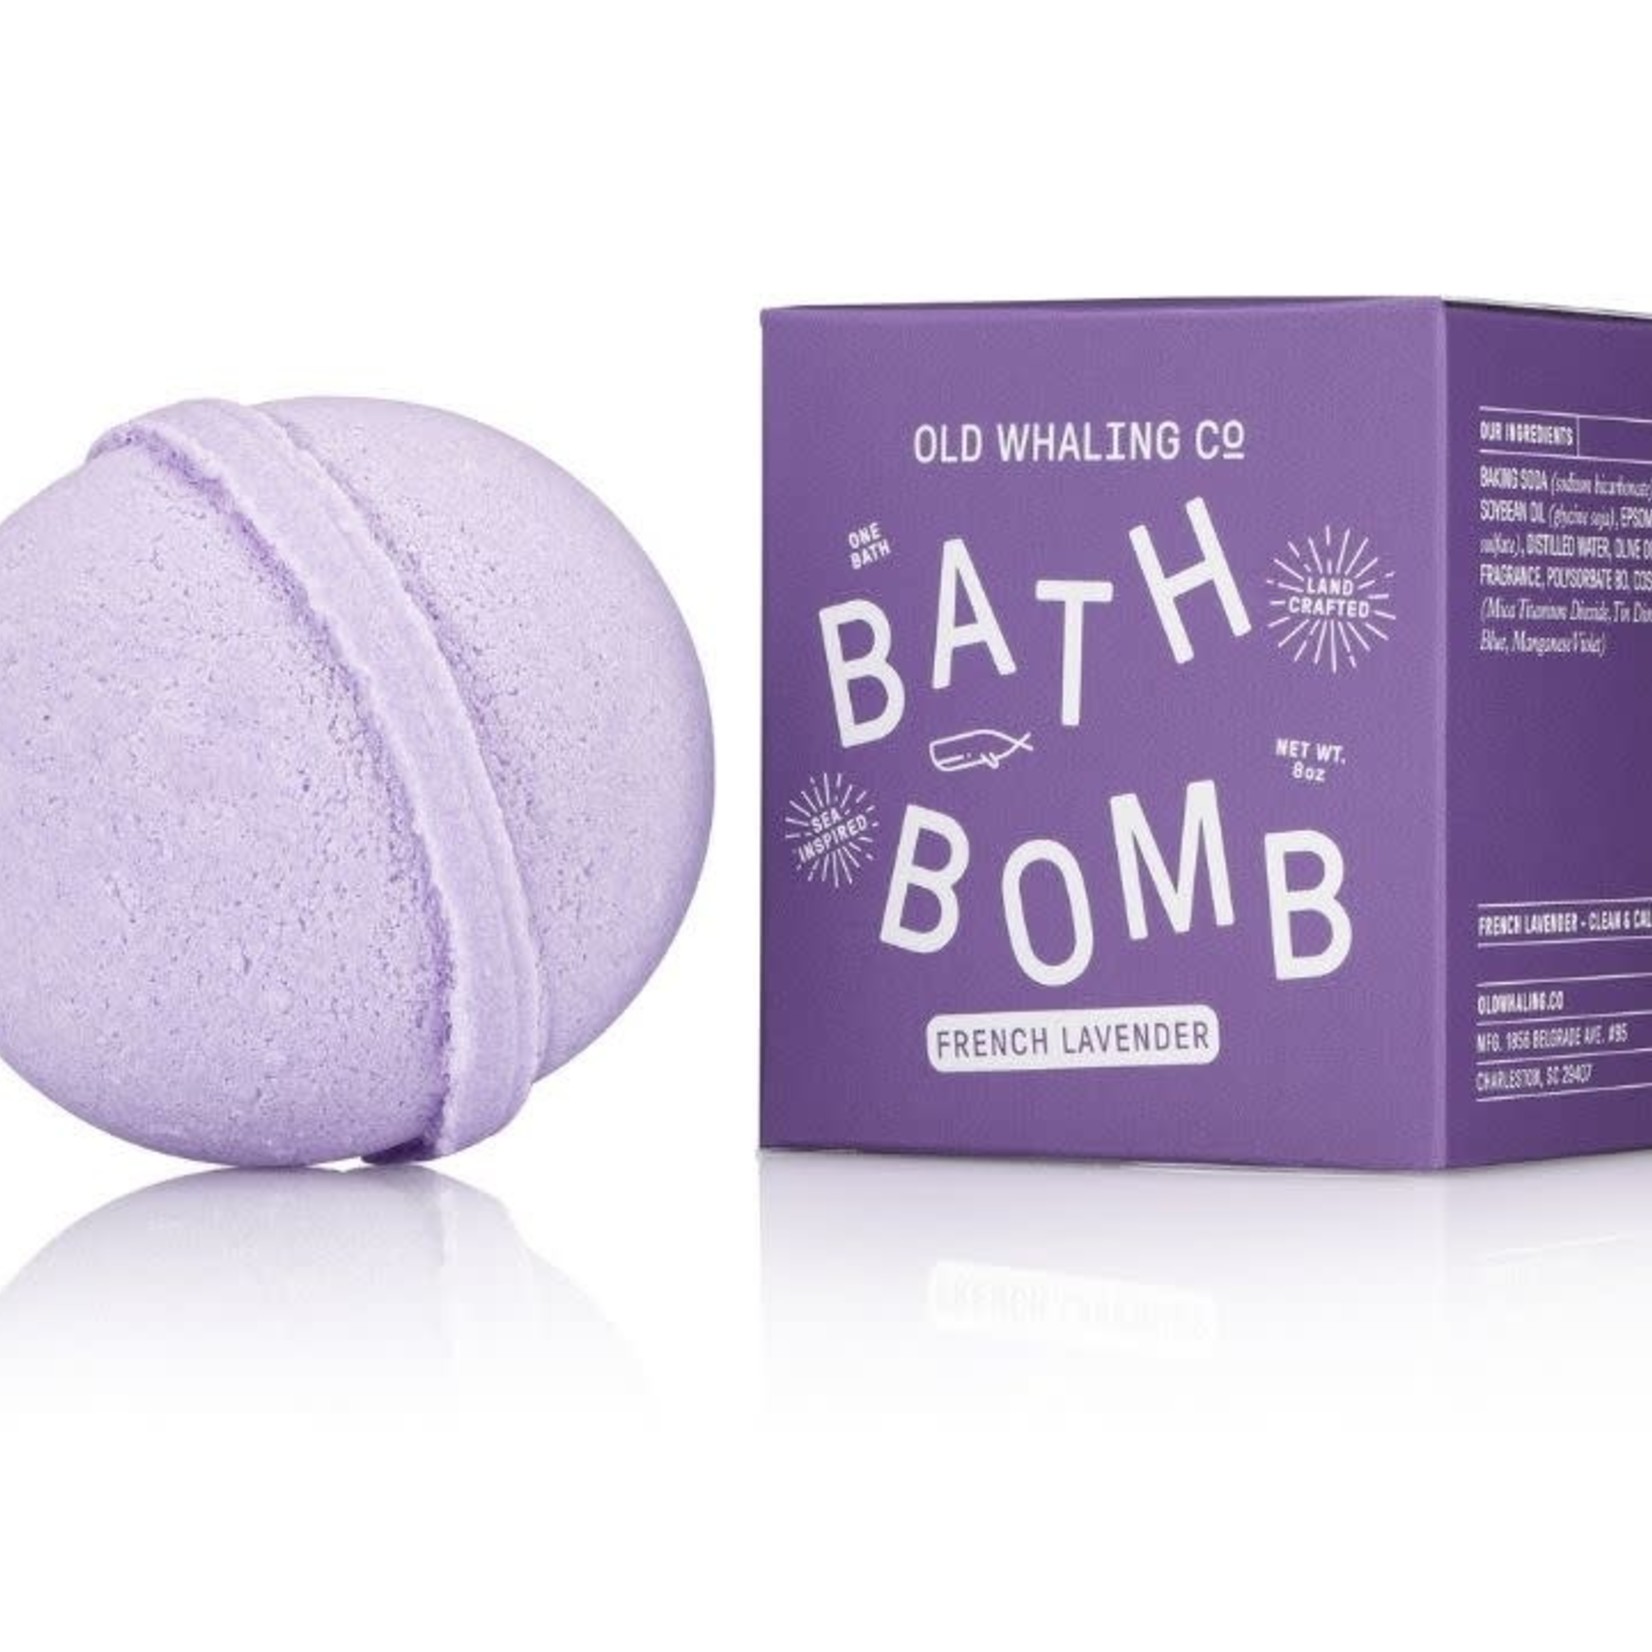 Old Whaling Company Old Whaling Company Bath Bomb